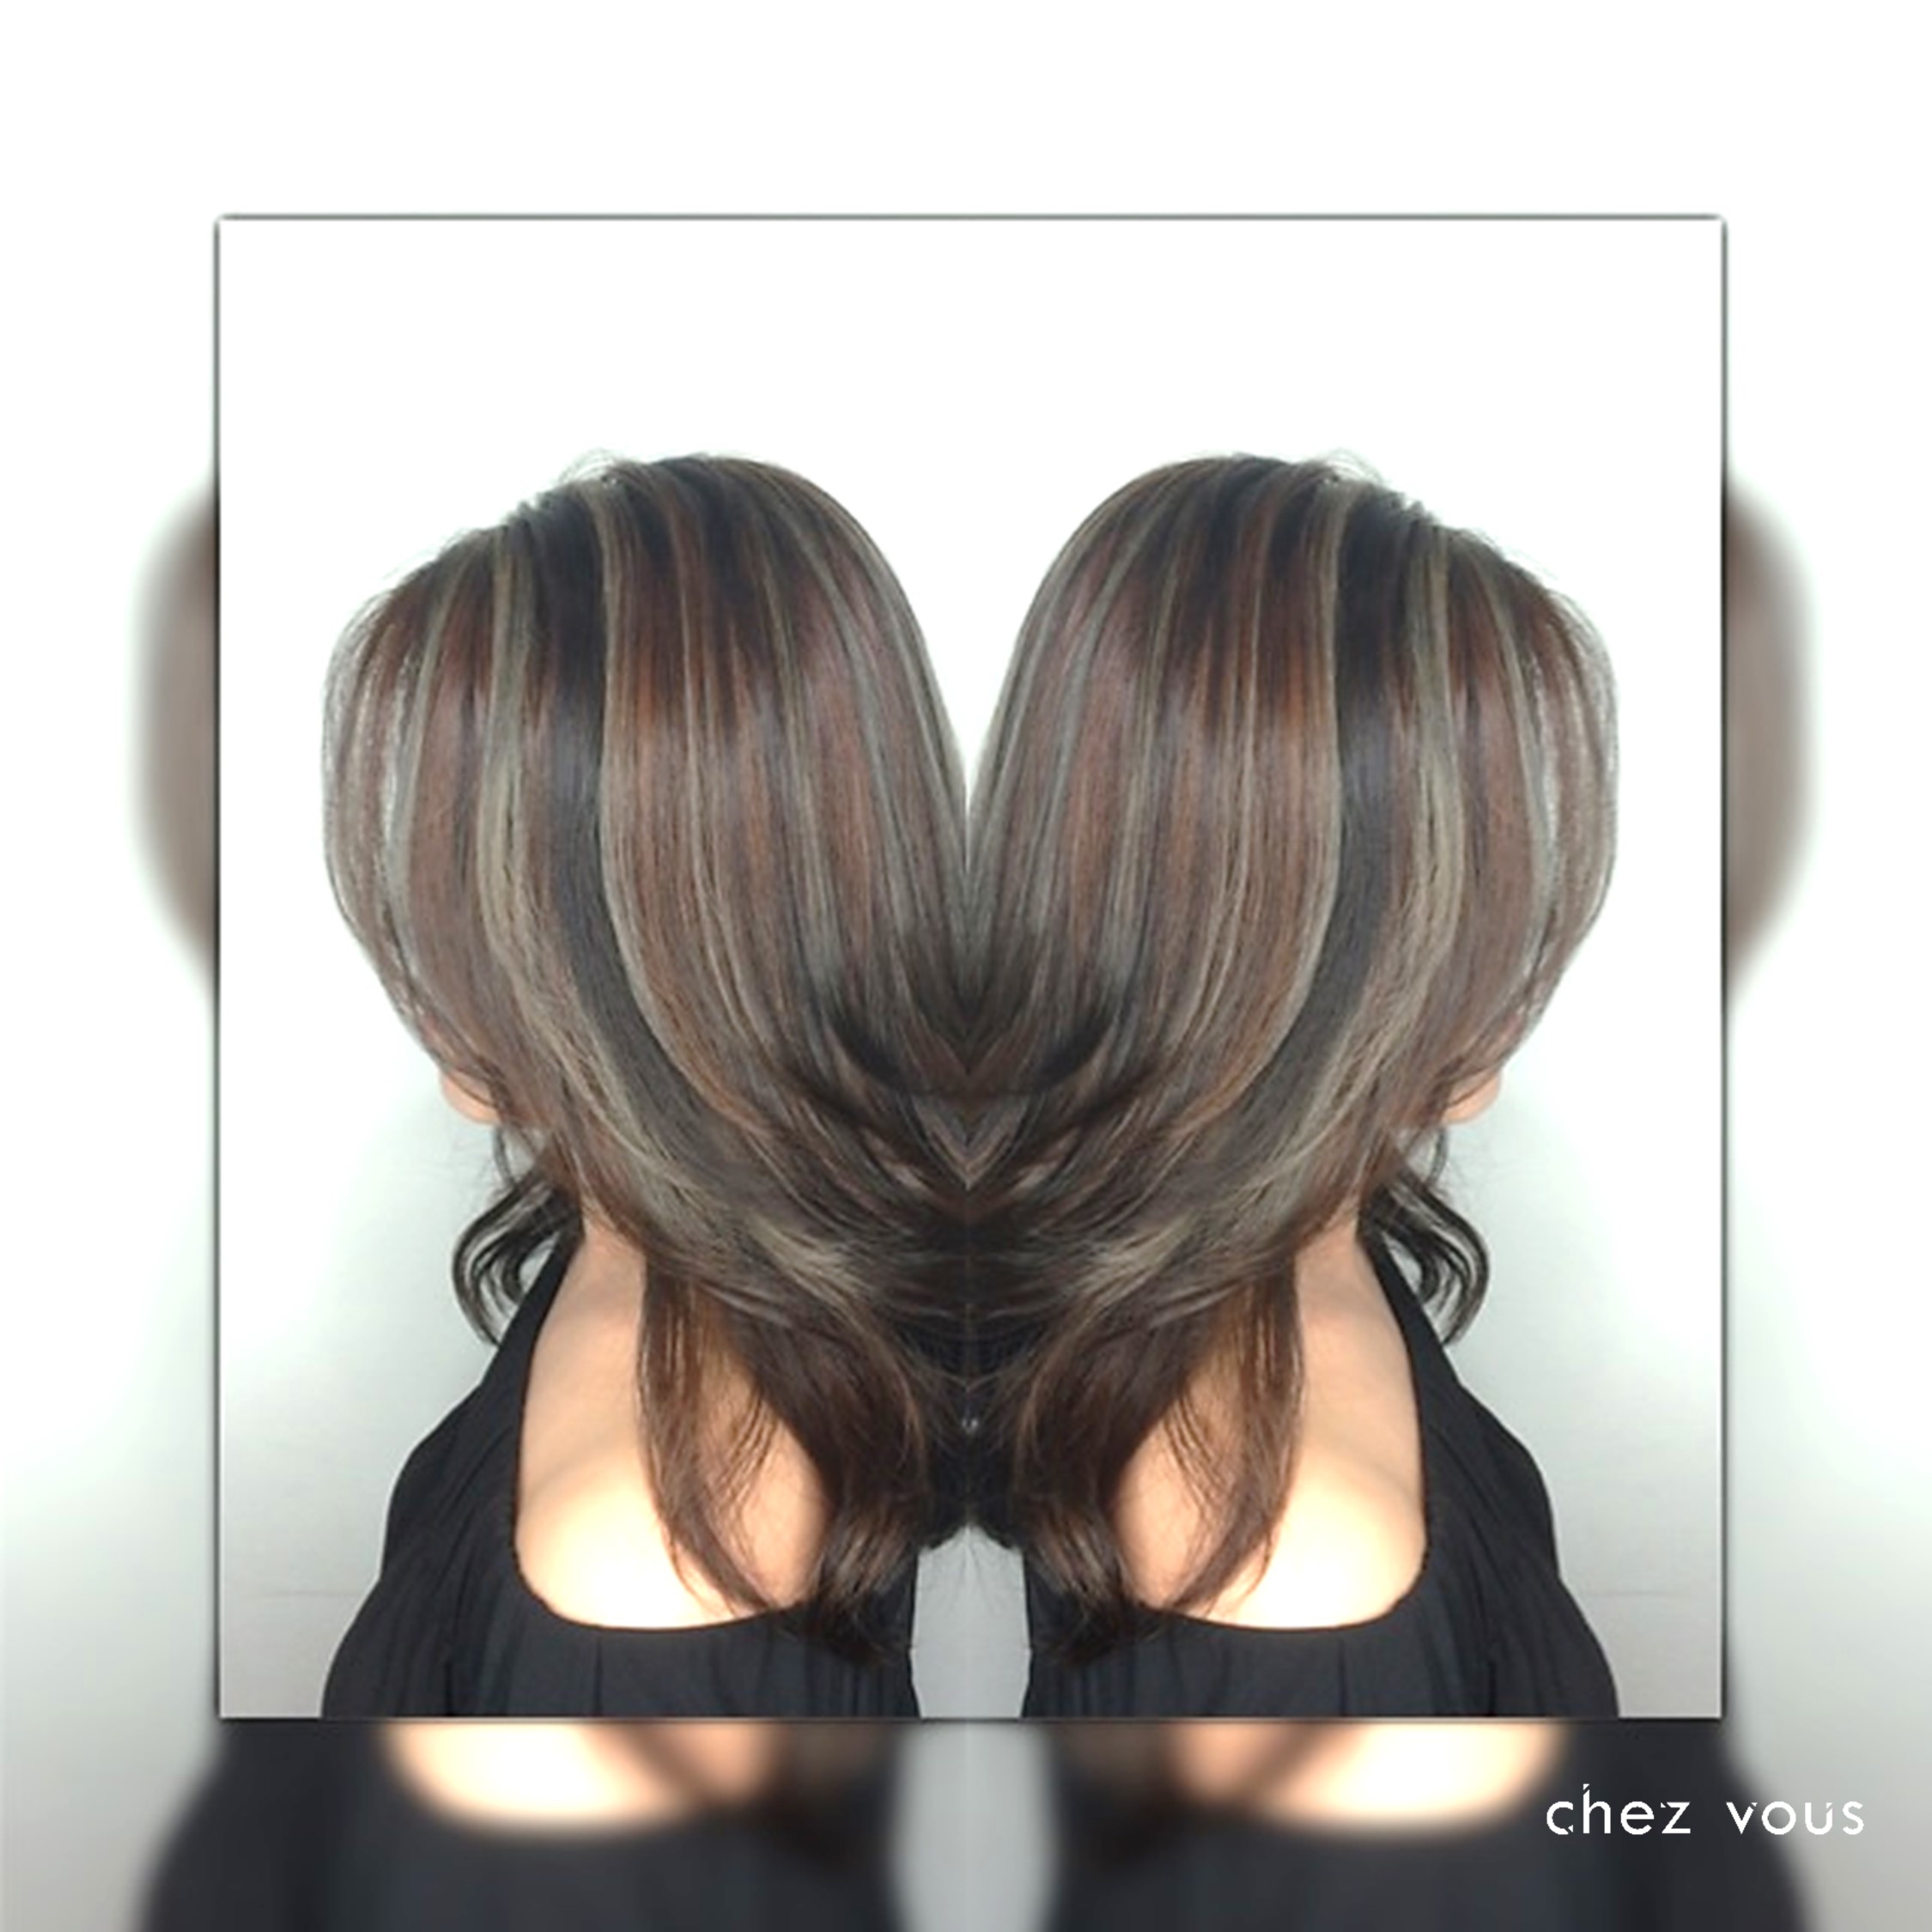 Done by Salon Director of Chez Vous: Serene Tan | Design: Melted Dramatic Nude Hair Warm X Cool Colour Balayage